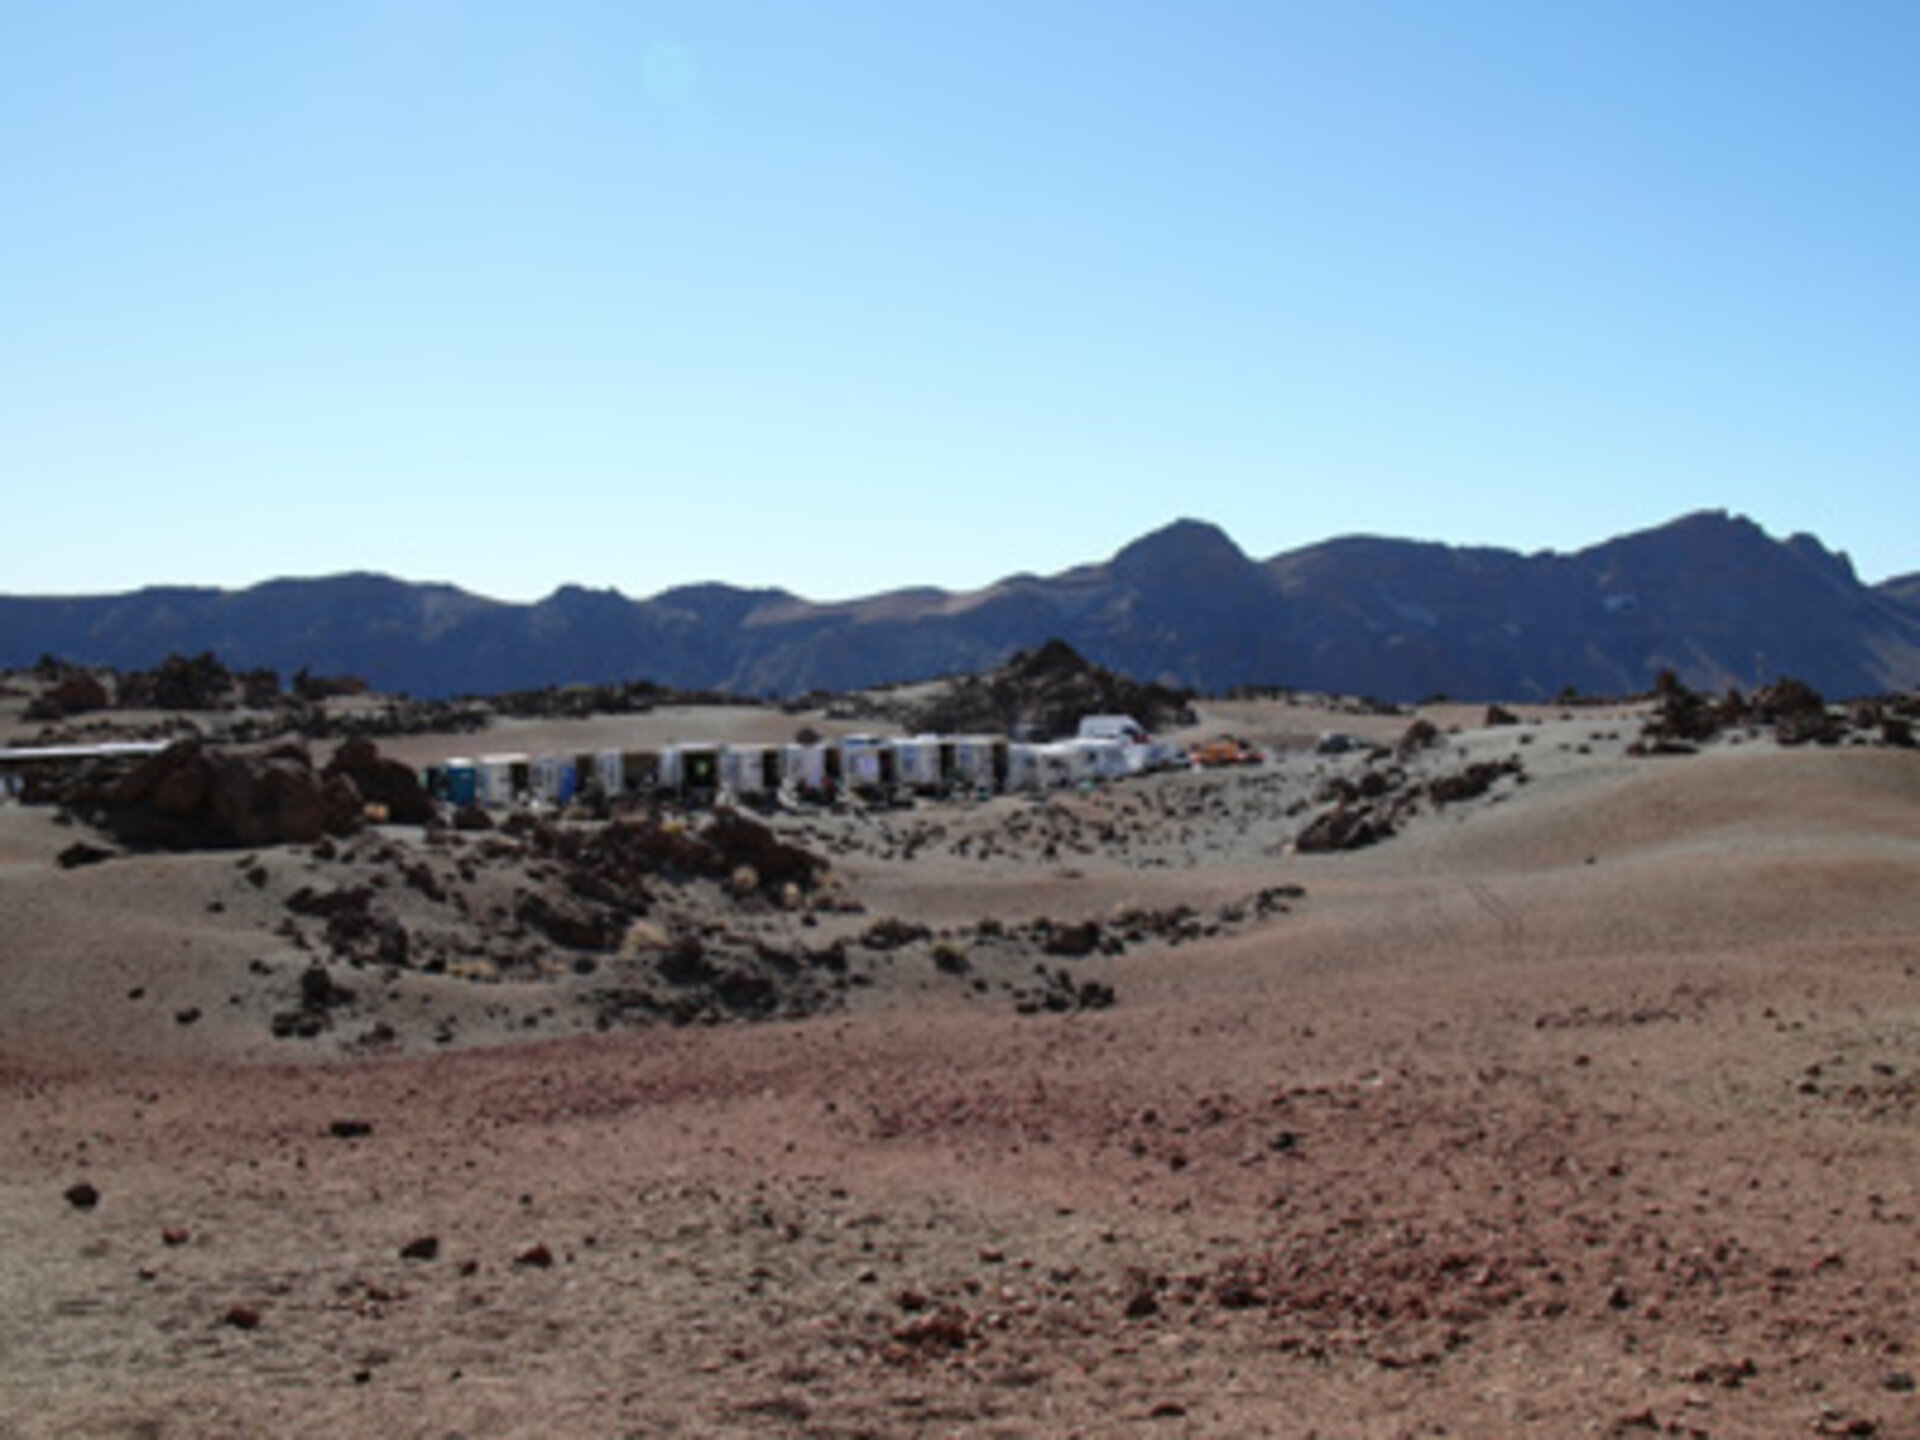 ESA's Lunar Rover Challenge trailer camp in the Teide mountains